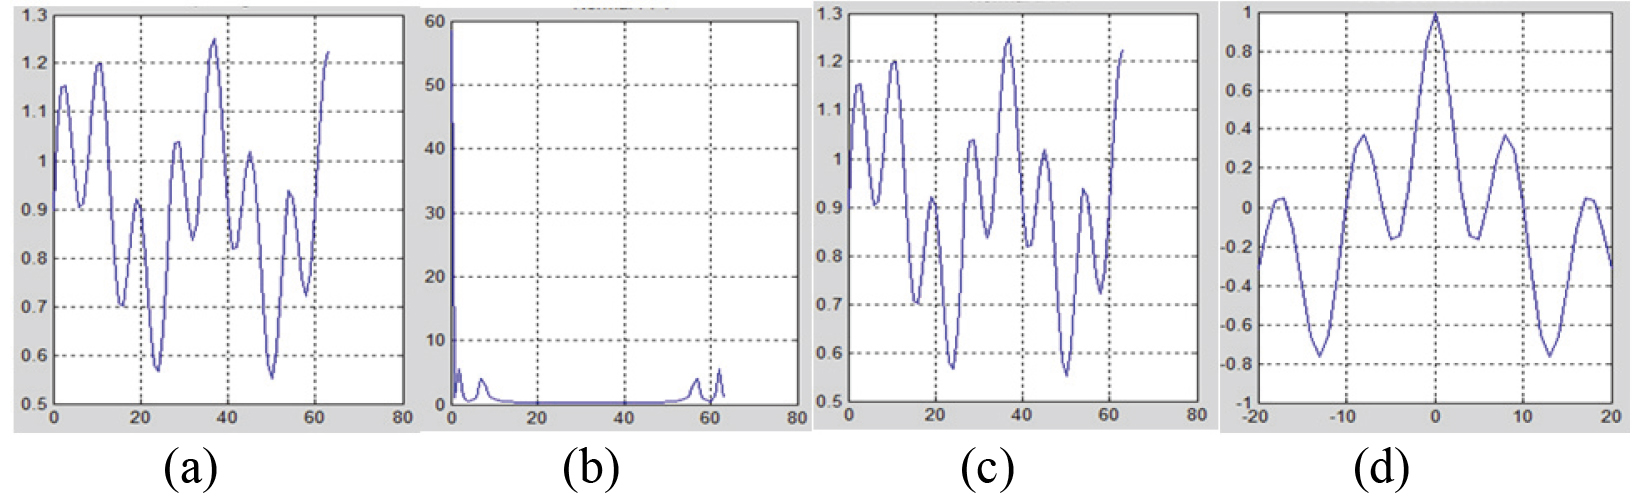 Simulation results obtained using the original FFT method: (a) input signal, (b) FFT results using the original method, (c) IFFT results using the original method, and (d) cross correlation with input signal and IFFT results using the original method.